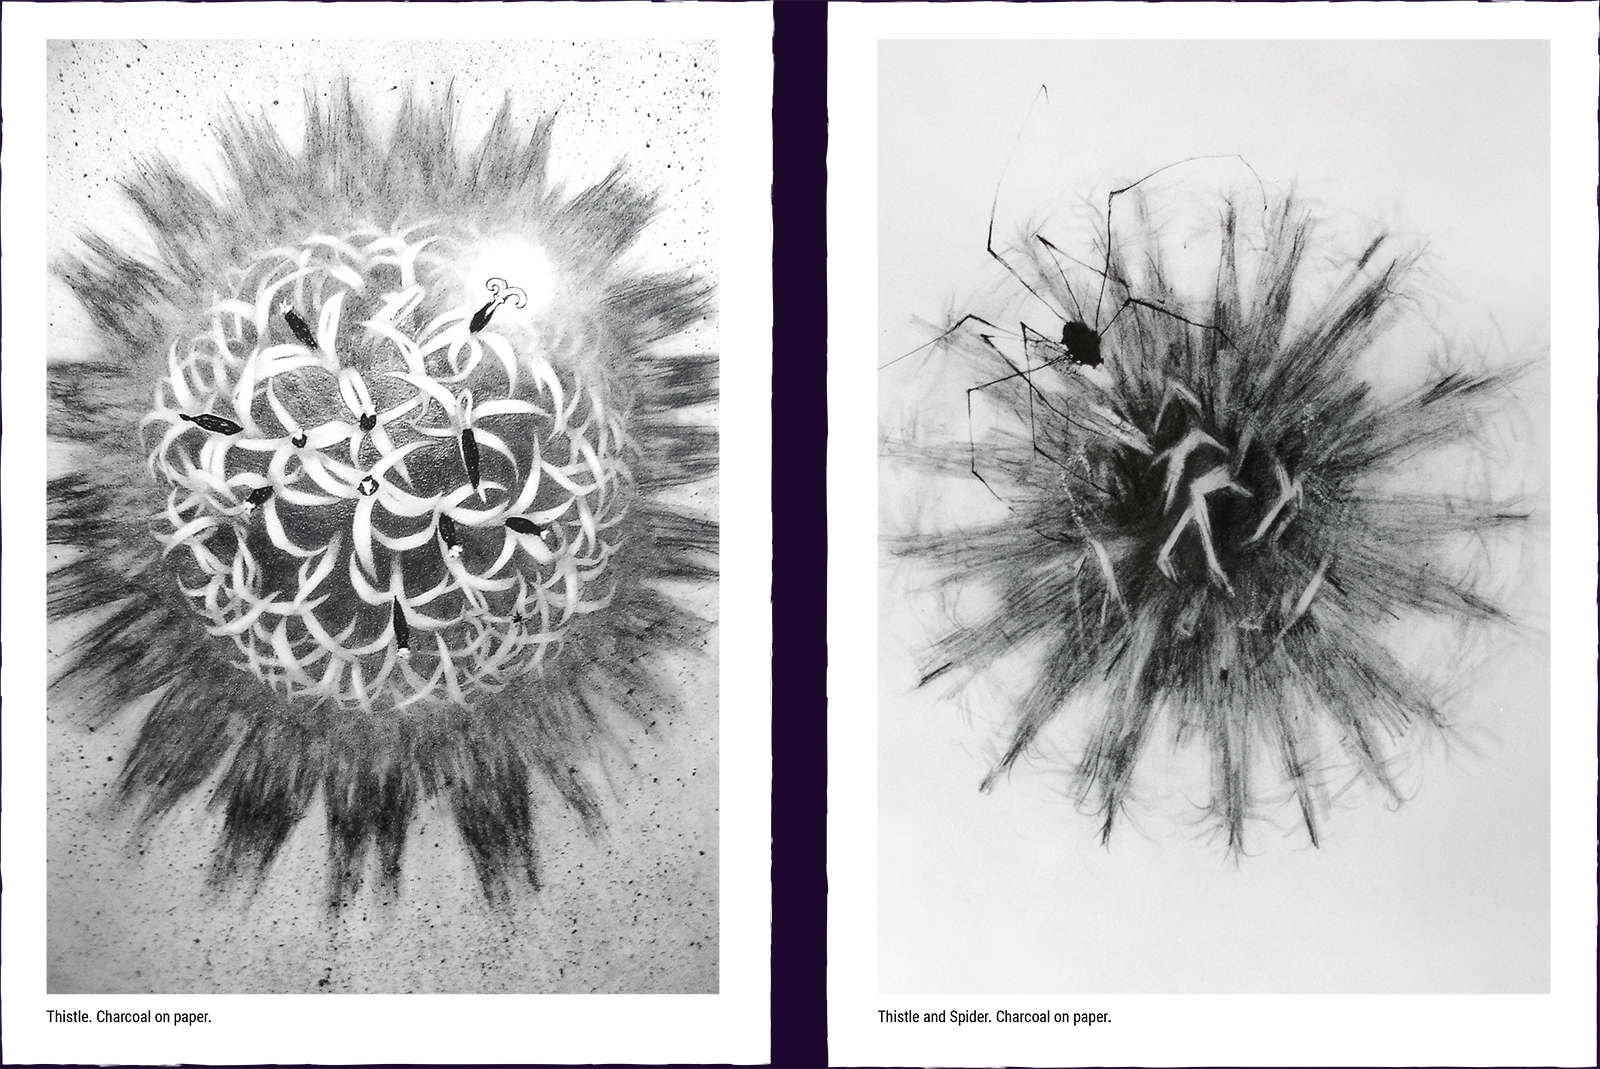 Two flower paintings. (1) Thistle. Charcoal on paper. (2) Thistle and Spider. Charcoal on paper.